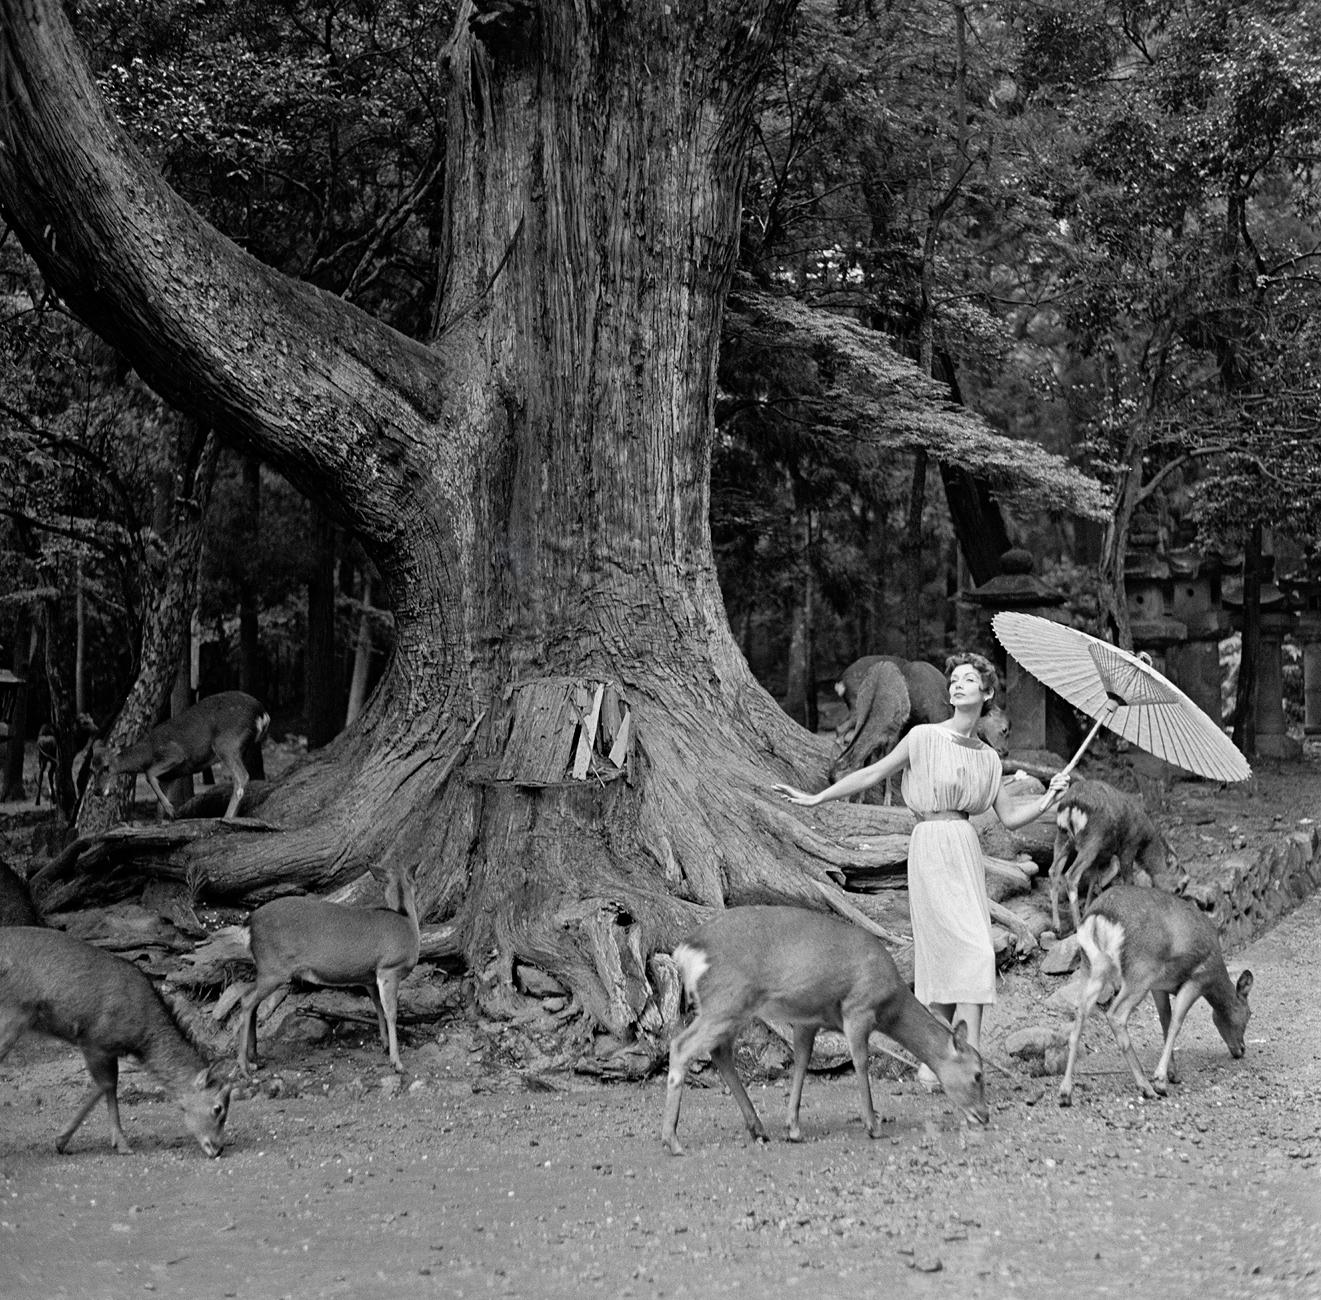 Selected from the Derujinsky: Around The World Portfolio, shot in Nara Deer Park Japan for Harper's Bazaar for Harper's Bazaar

Artist: Gleb Derujinsky

Title: Nara

Year: 1957

Estate Edition: signed, stamped and numbered on verso. Signed by Andrea